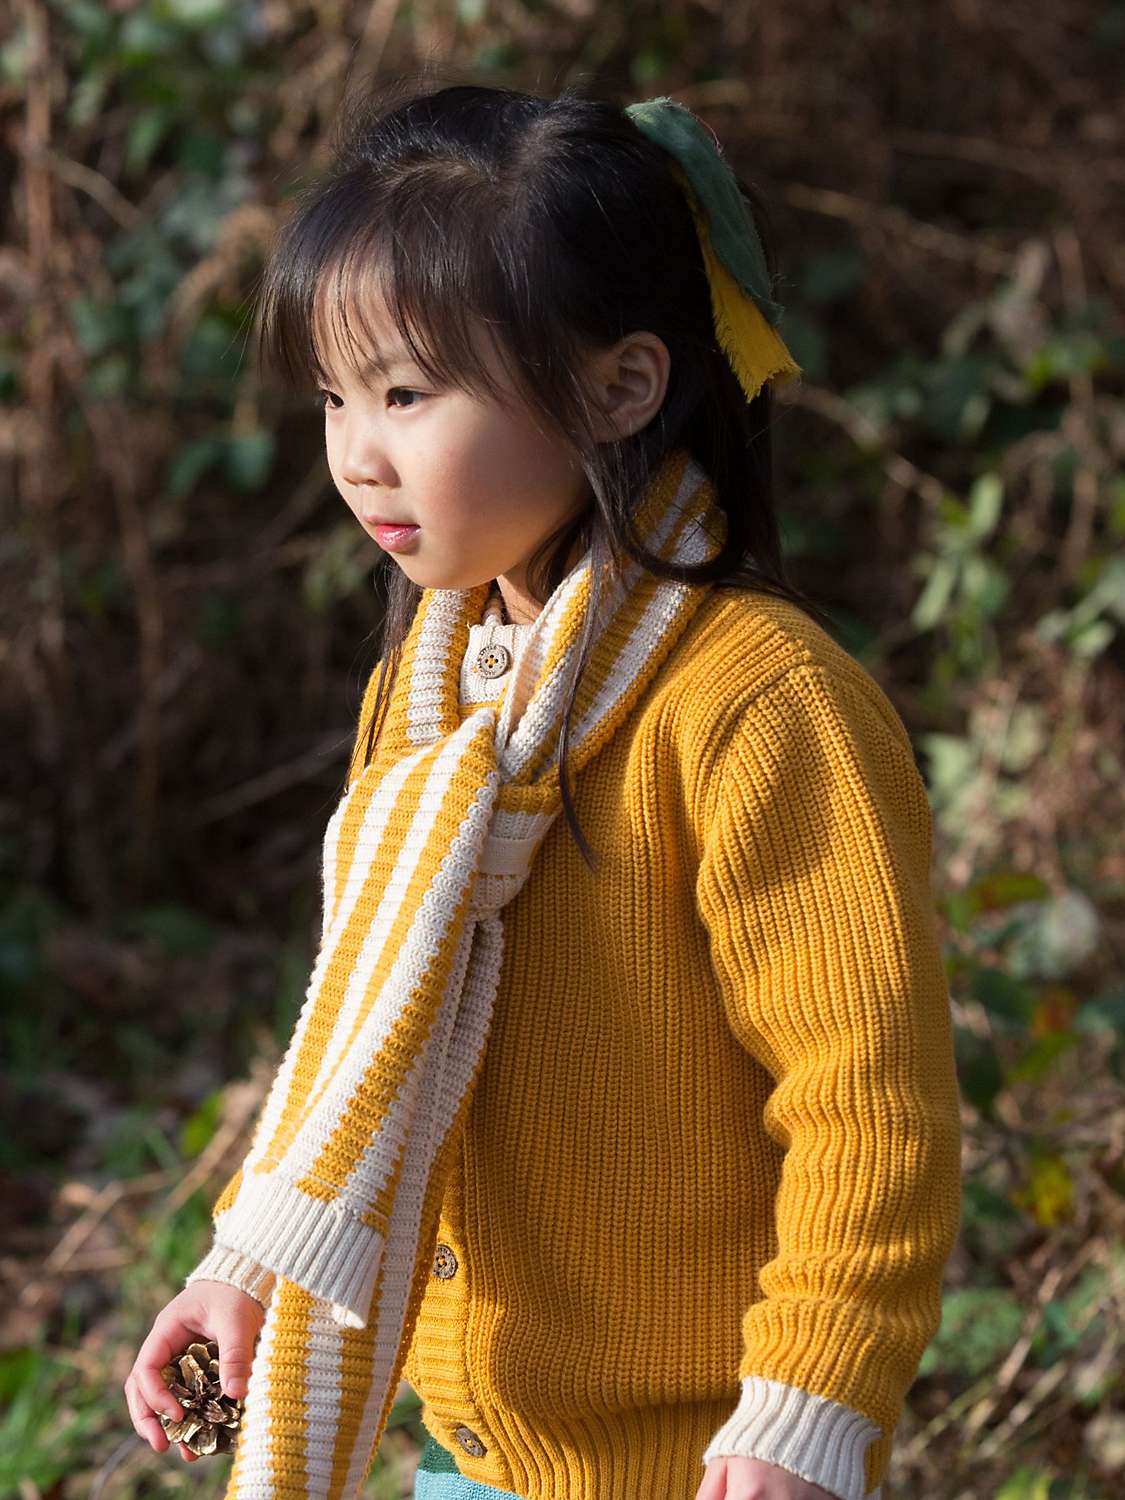 Buy Little Green Radicals Kids' Striped Knitted Scarf, Gold Online at johnlewis.com